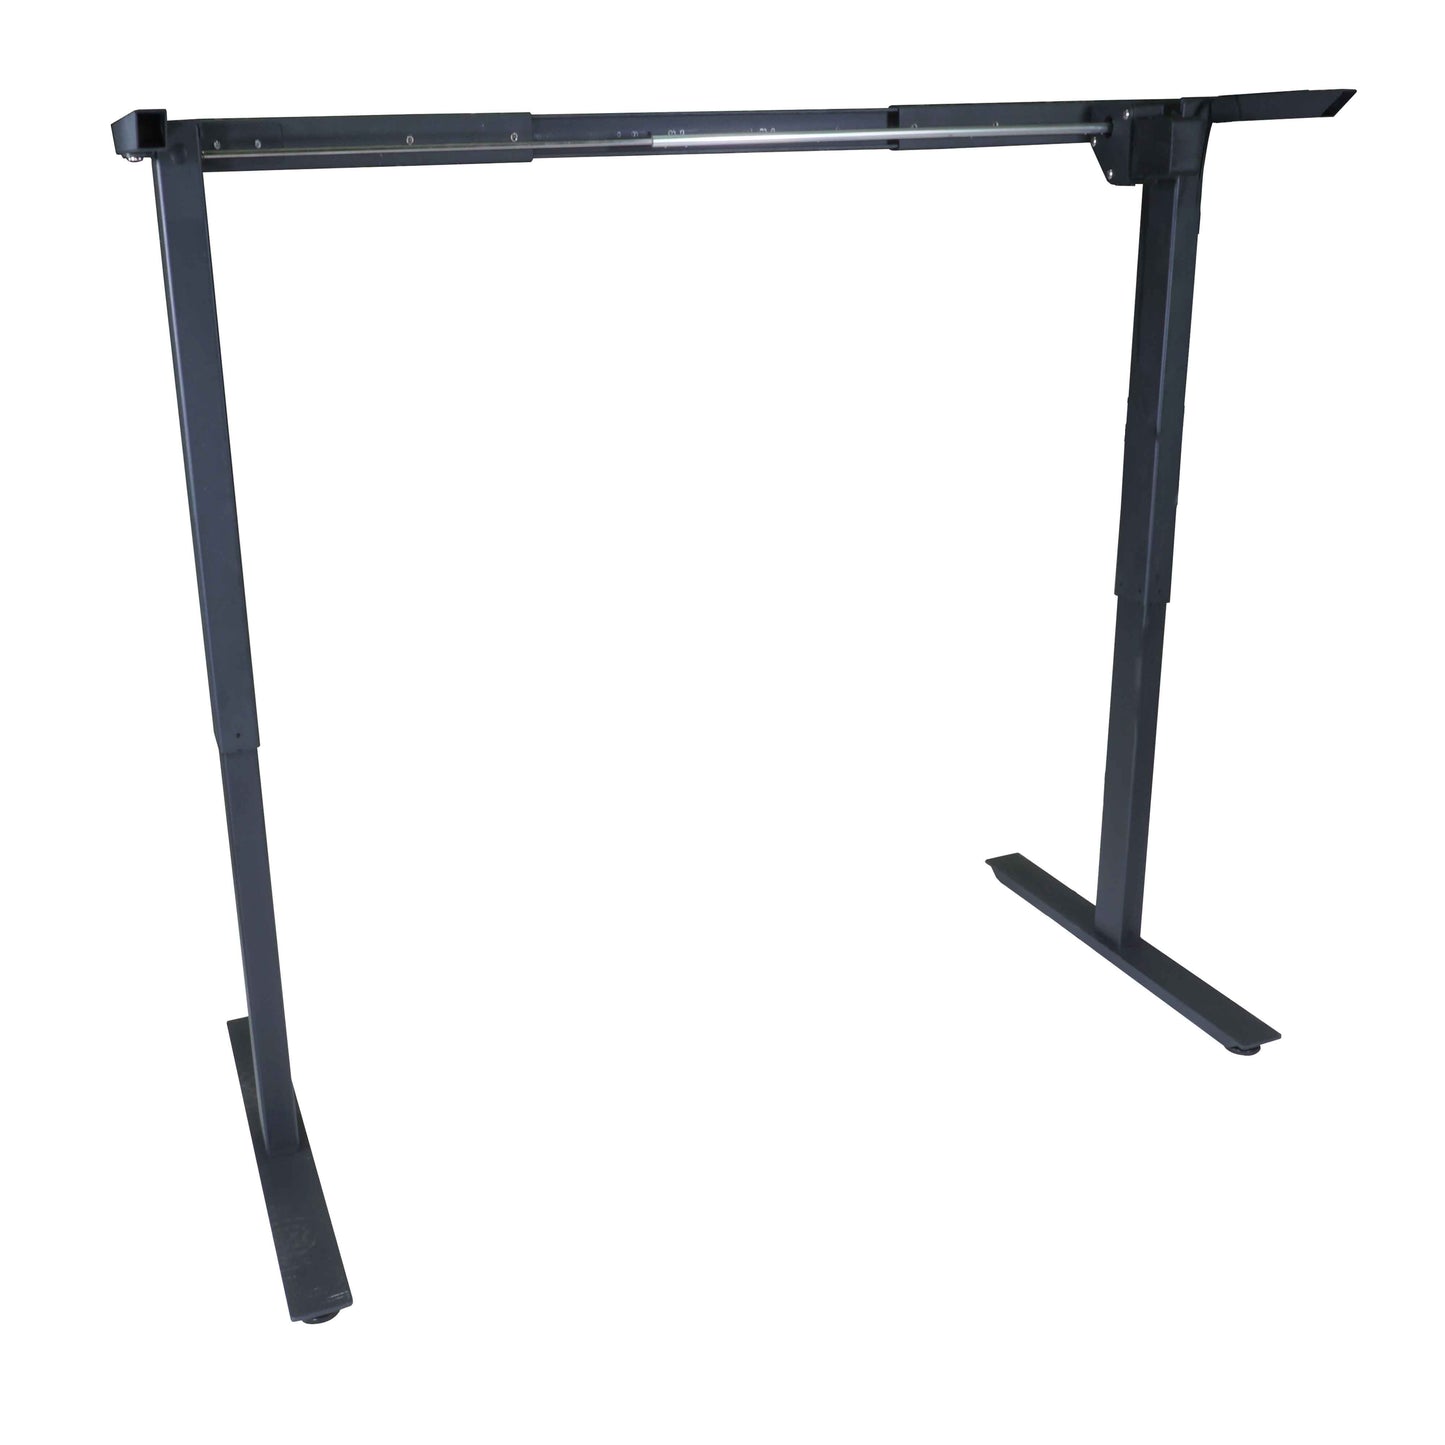 Single Motor Electric Adjustable Height A2 Sit-Stand Desk (Black) - view 5